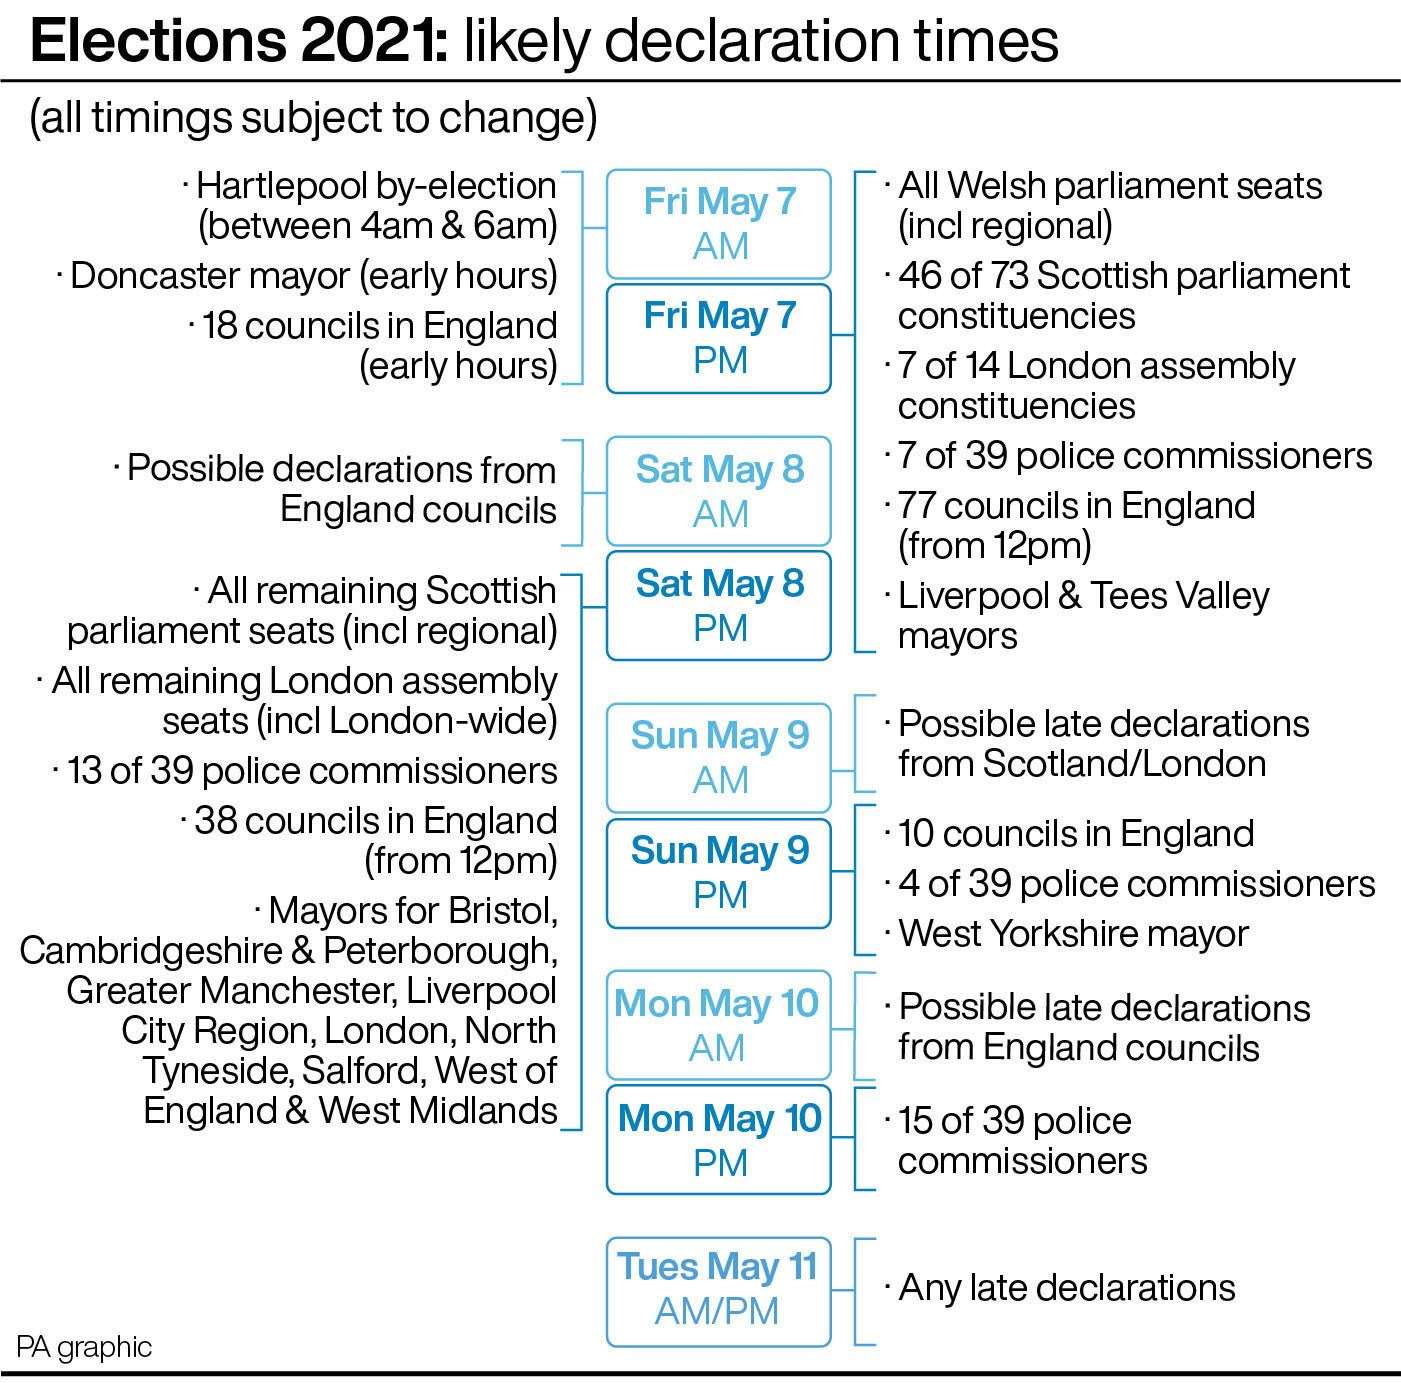 Elections 2021: Day-by-day guide to likely declaration times